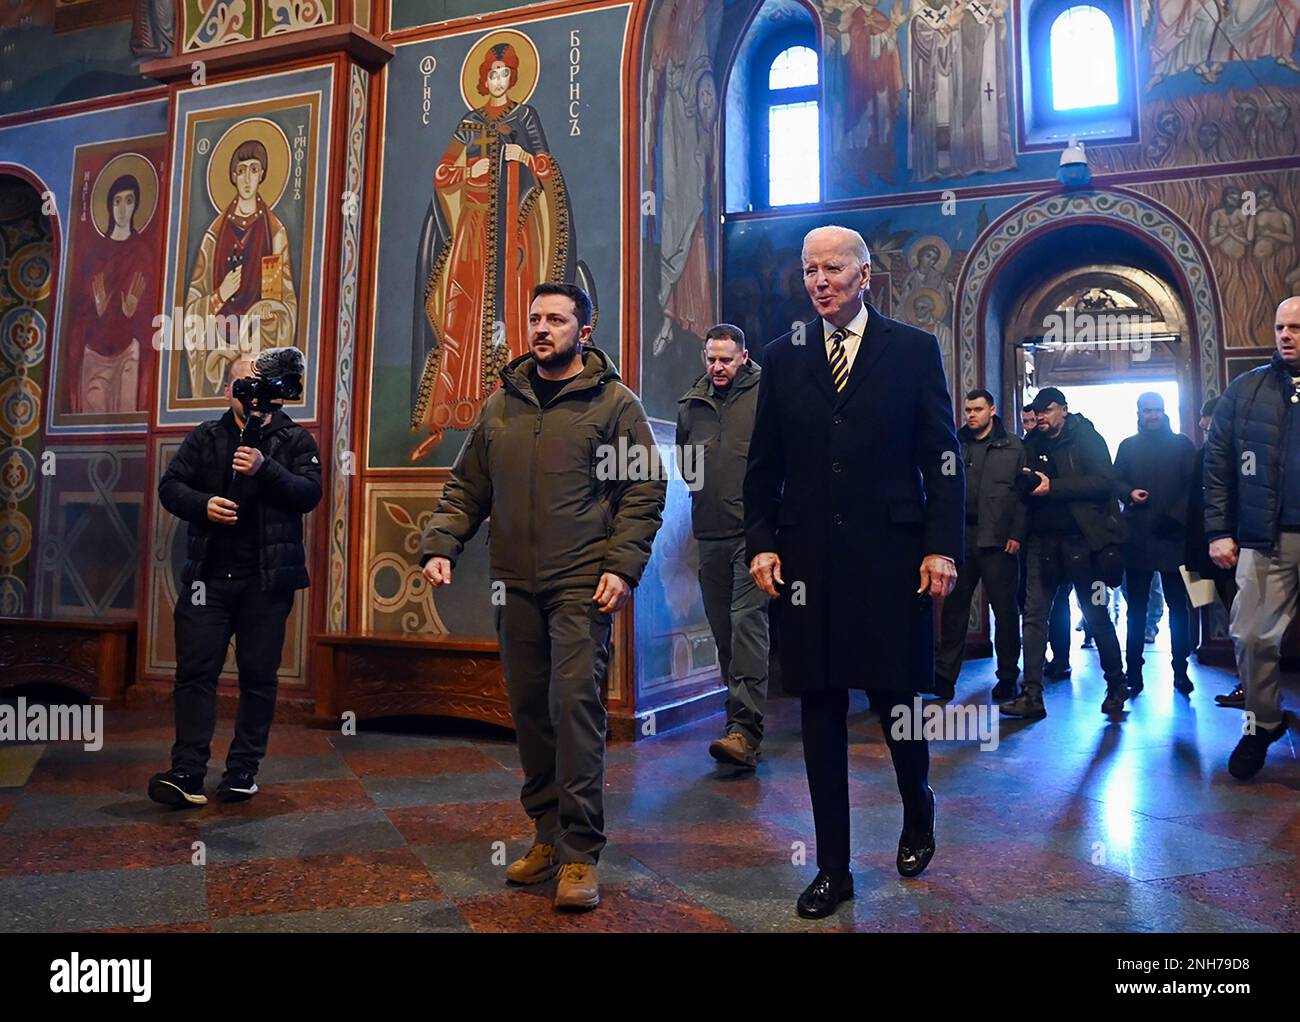 Kyiv, Ukraine. 20th Feb, 2023. US President Joe Biden (R) and his Ukrainian Counterpart Volodymyr Zelensky (L) visit St. Michael's Golden-Domed Cathedral during an unannounced visit, on February 20, 2023 in Kyiv, Ukraine. The US President Joe Biden made his first unannounced wartime visit to Ukraine, in a show of support ahead of the one-year anniversary of Russia's invasion on February 24. Photo by Ukrainian Orthodox Church (OCU)/ Credit: UPI/Alamy Live News Stock Photo